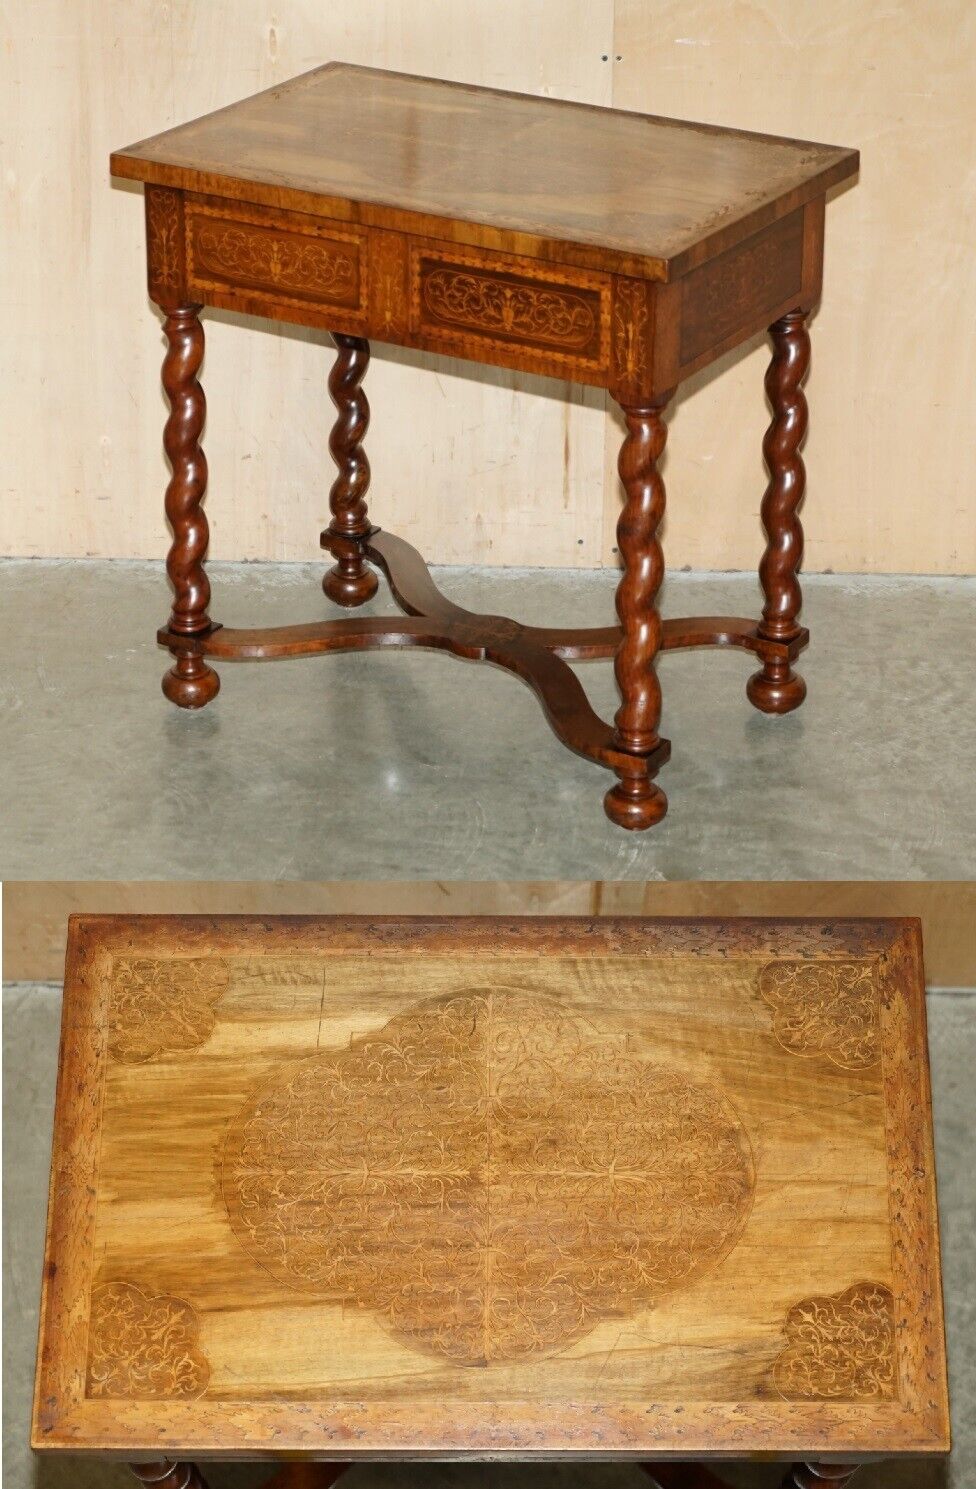 ANTIQUE WILLIAM & MARY STYLE RESTORED SEAWEED MARQUETRY SINGLE DRAWER TABLE DESK